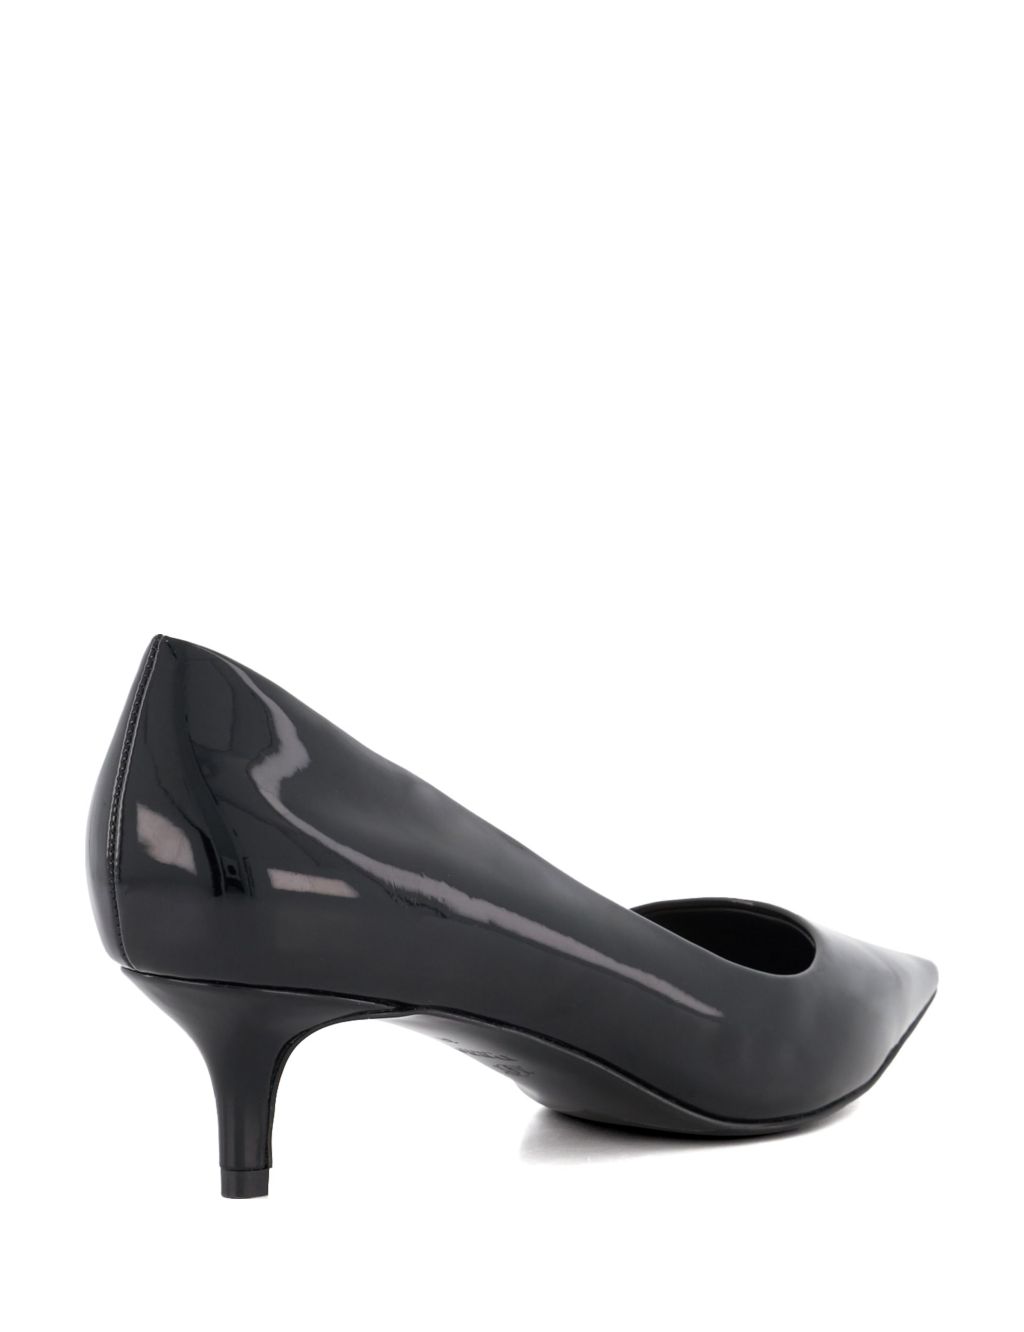 Patent Kitten Heel Pointed Court Shoes image 3